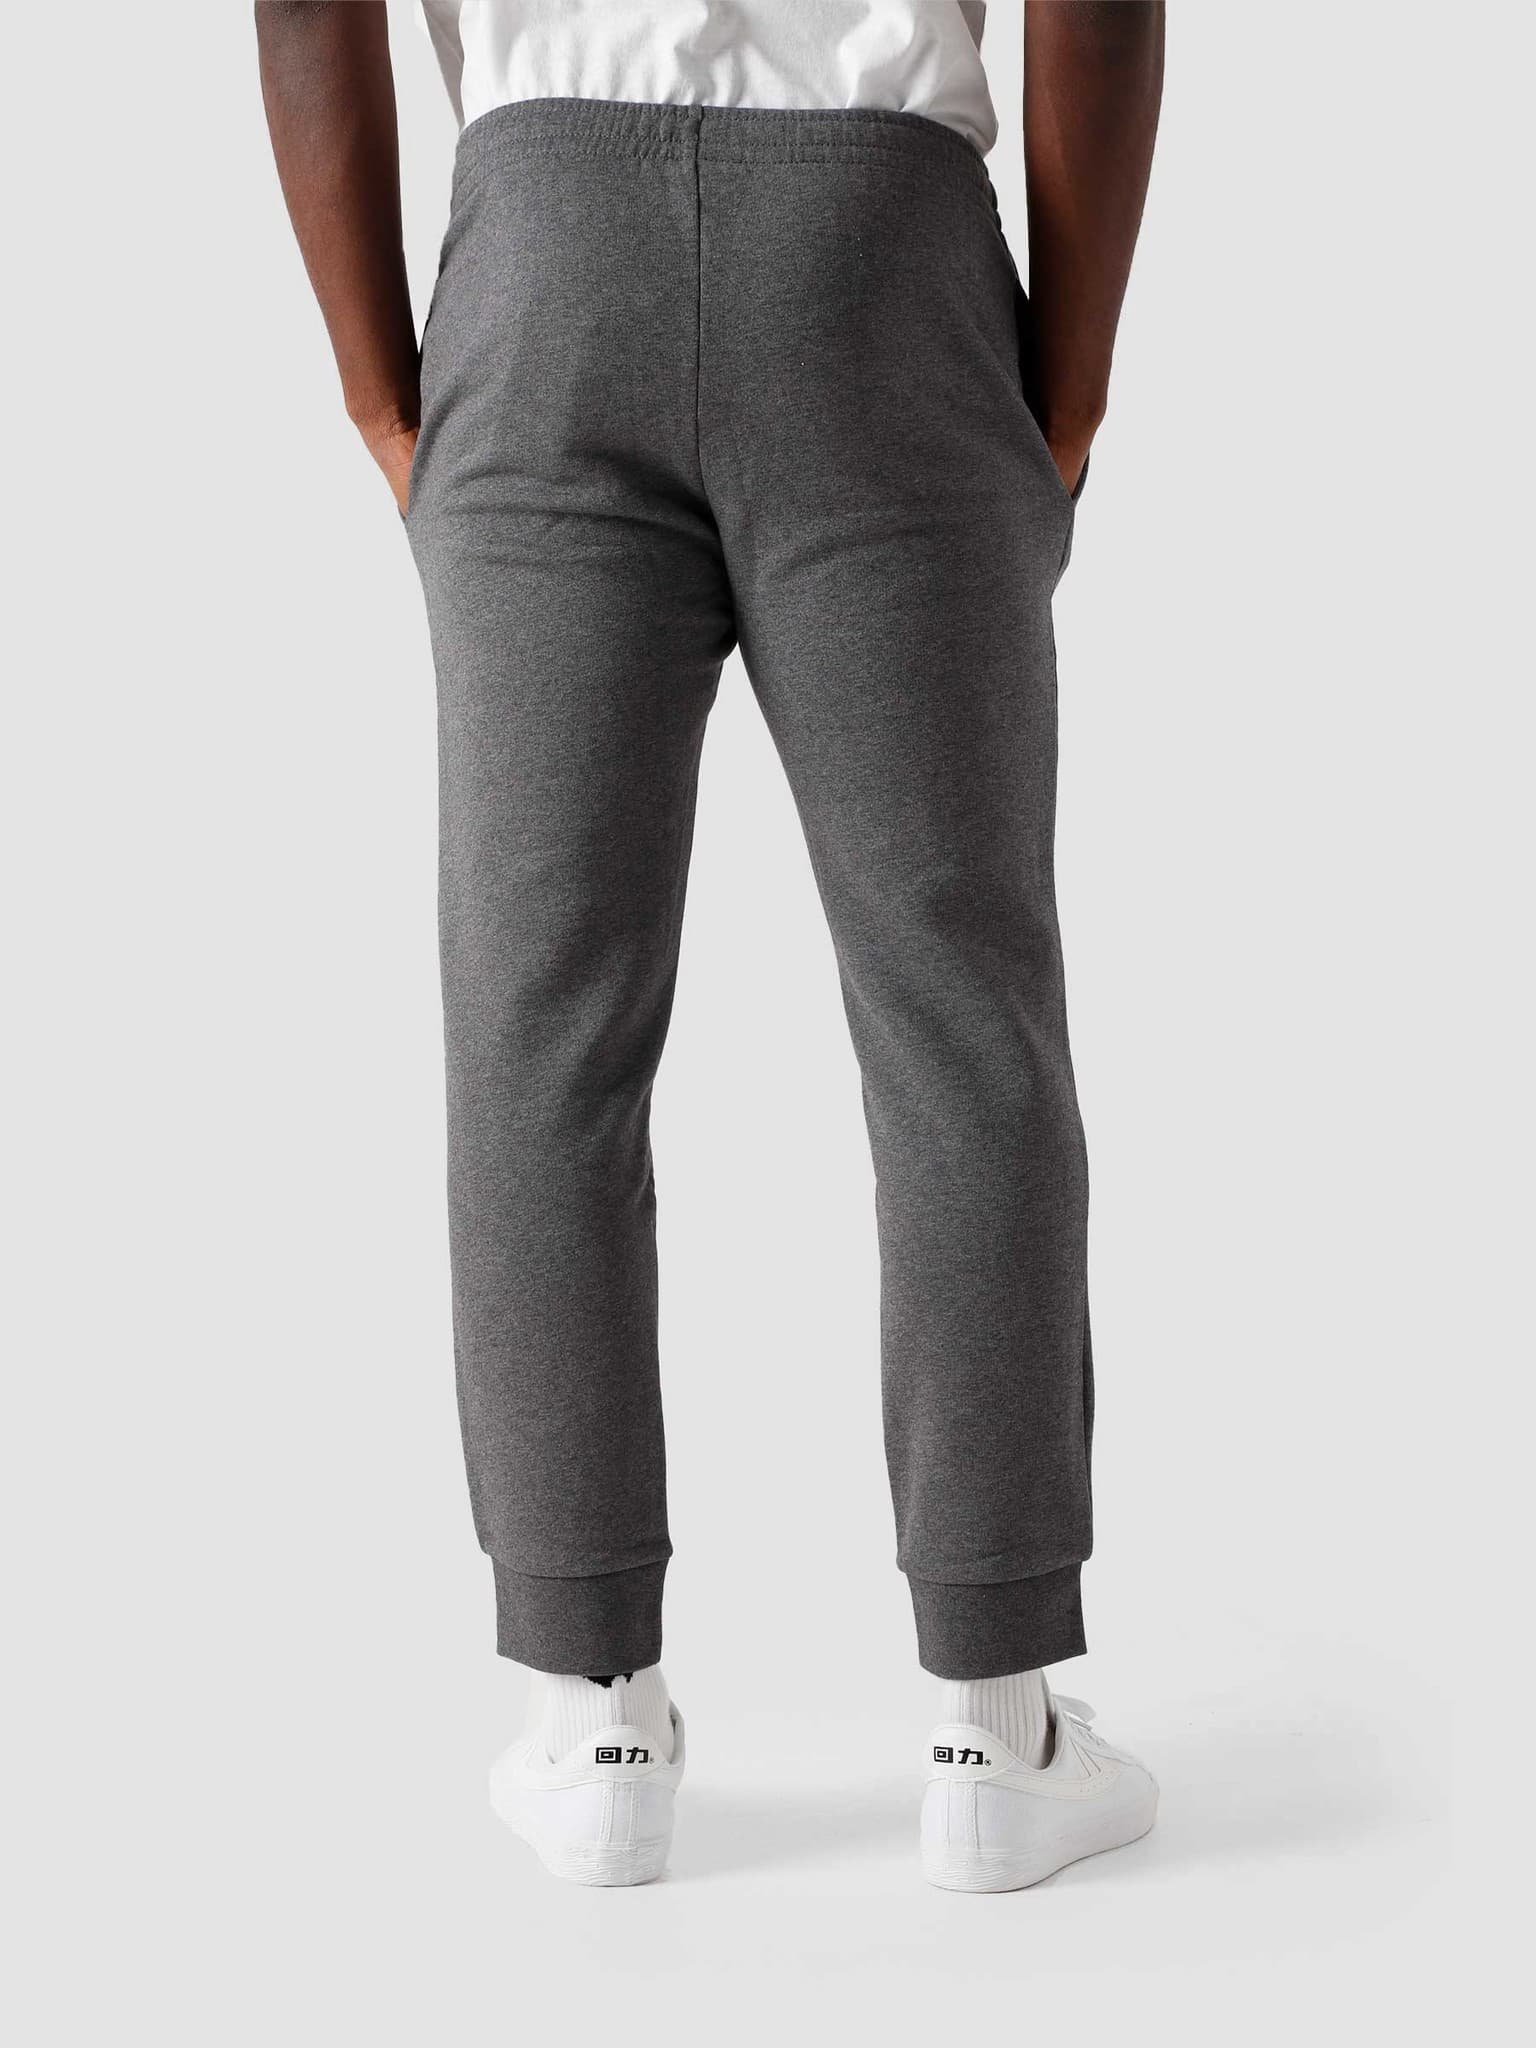 1HW2 Men's Tracksuit Trousers Pitch Chine XH9507-11